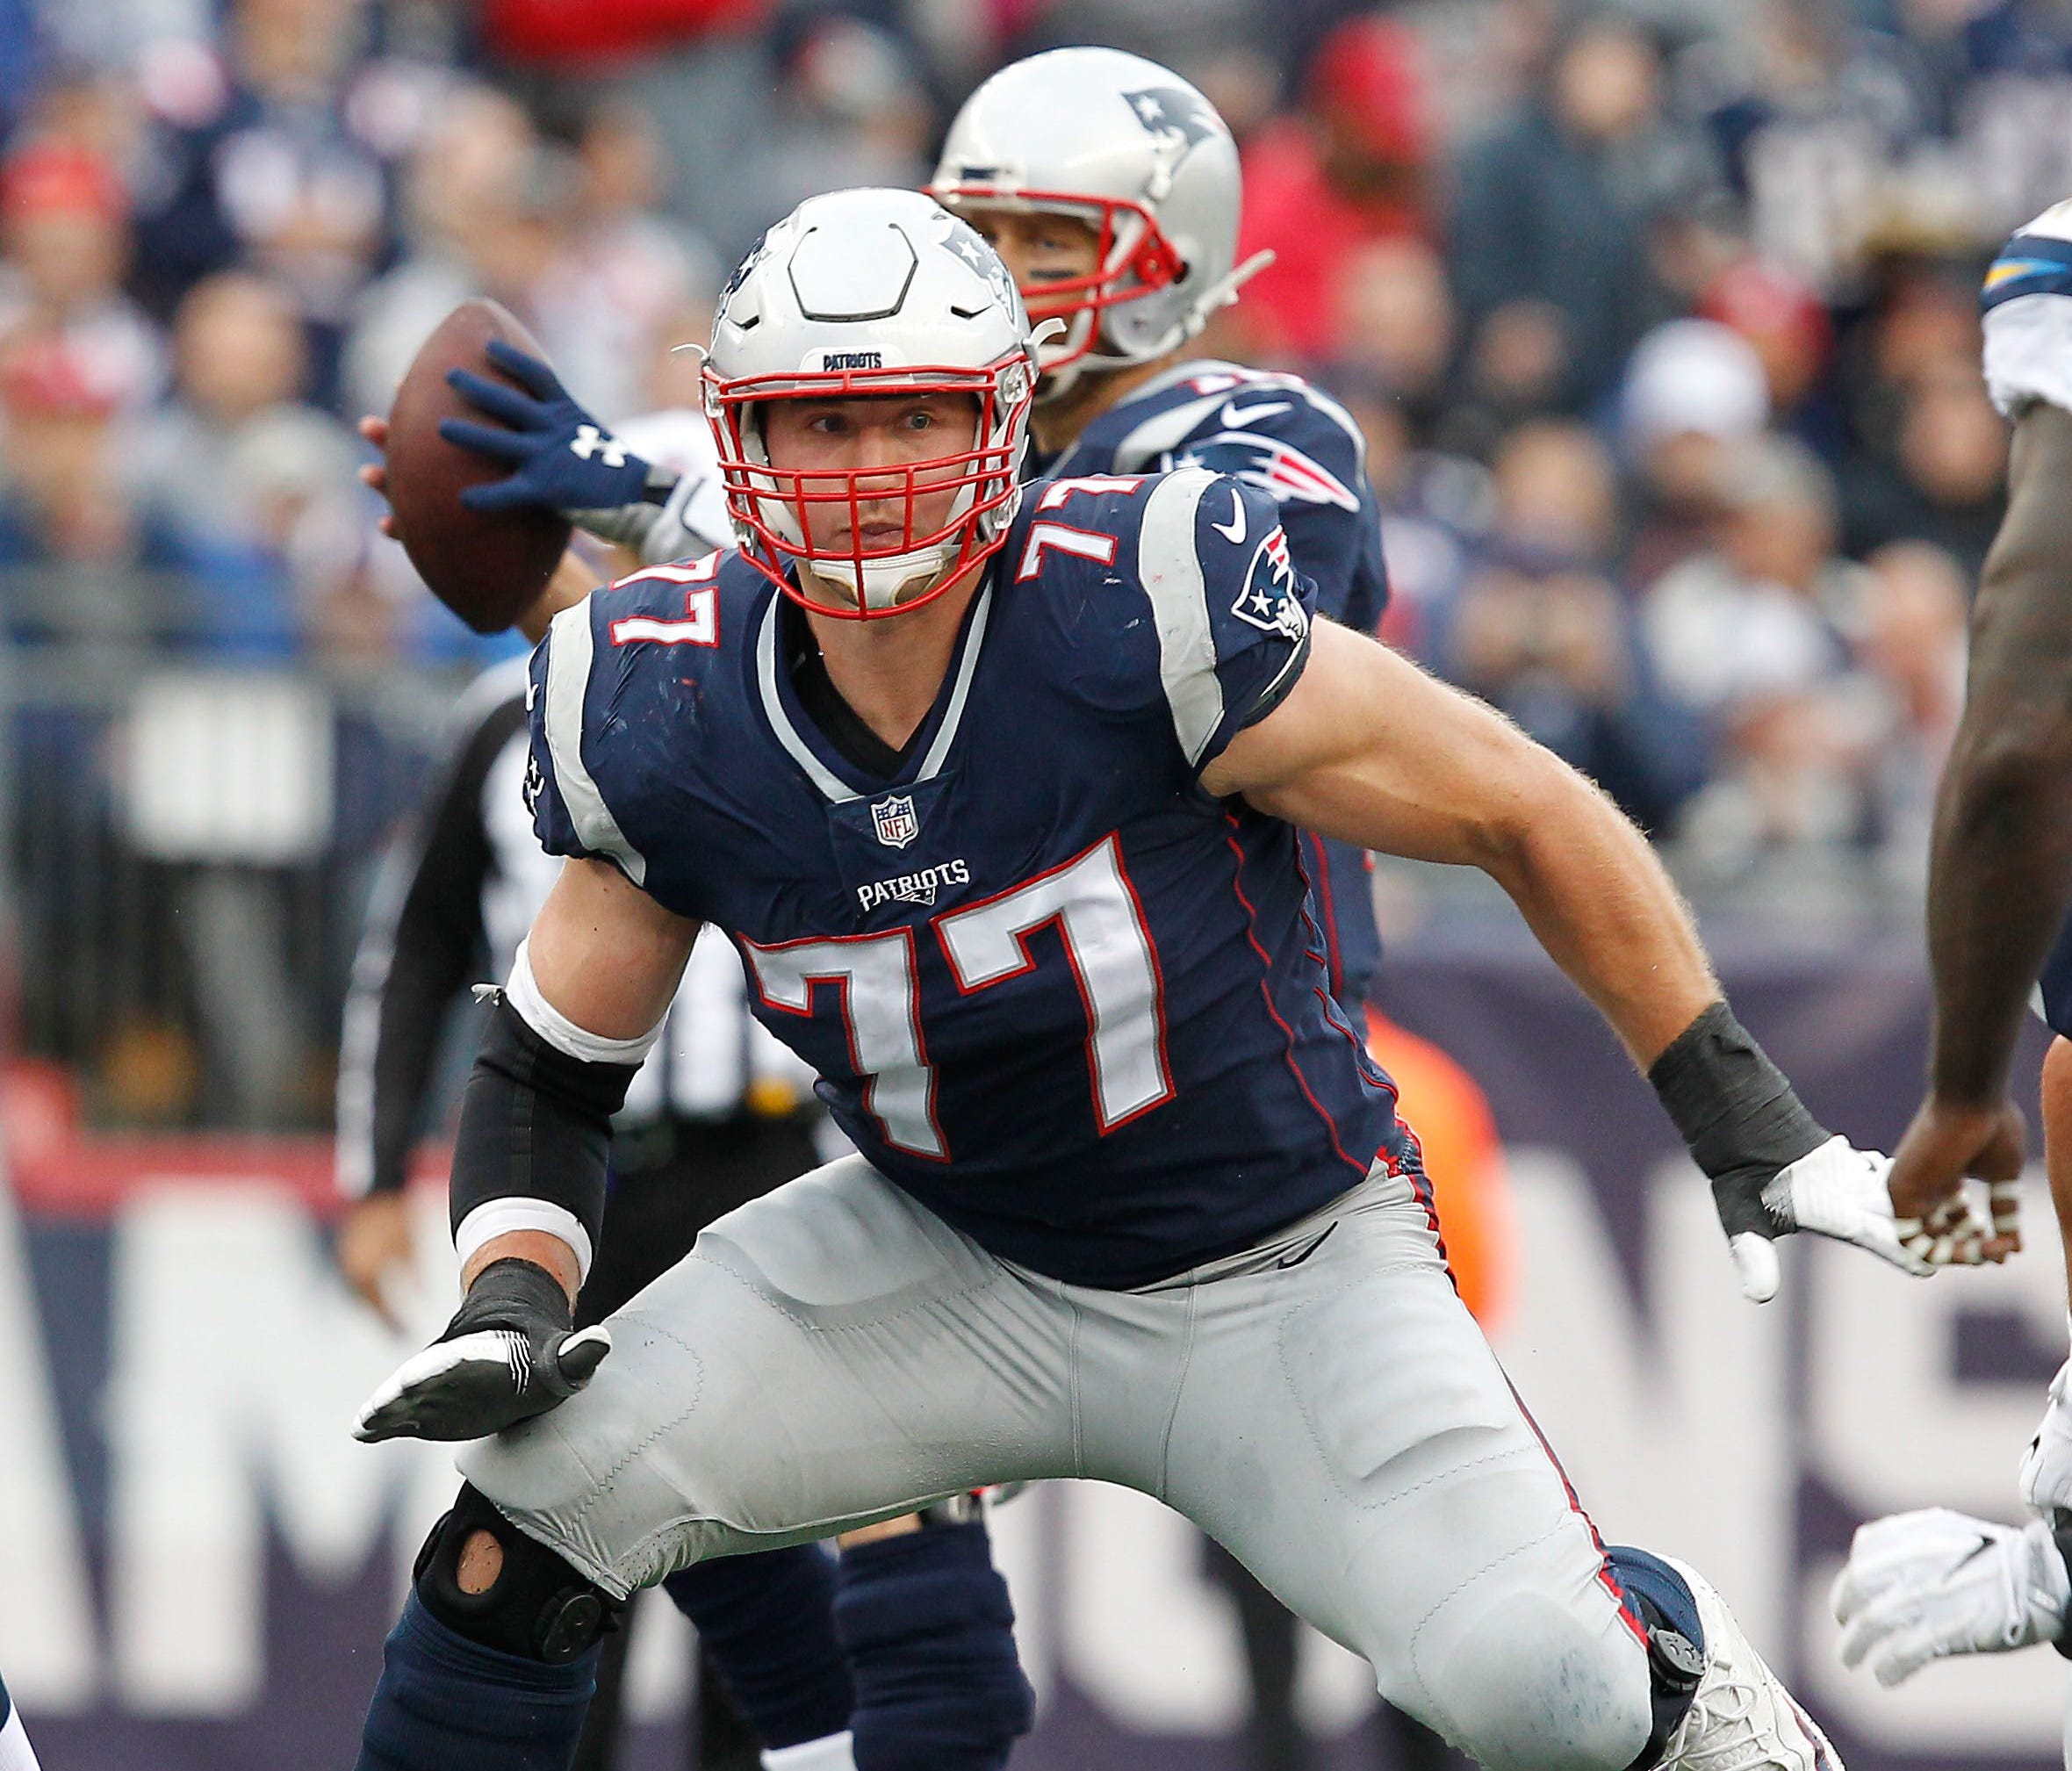 New England Patriots offensive tackle Nate Solder should be the most sought-after player at his position in 2018.